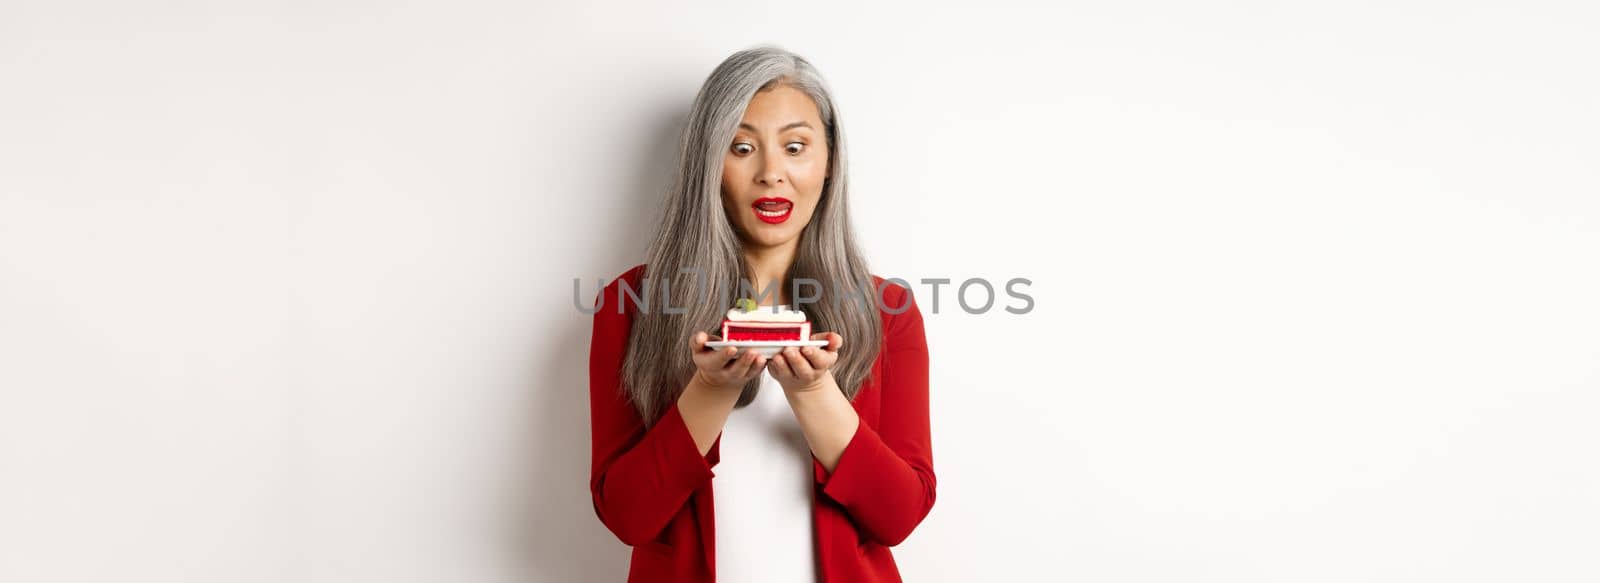 Image of funny asian senior woman looking tempted at piece of cake, desire to bite dessert, standing over white background.